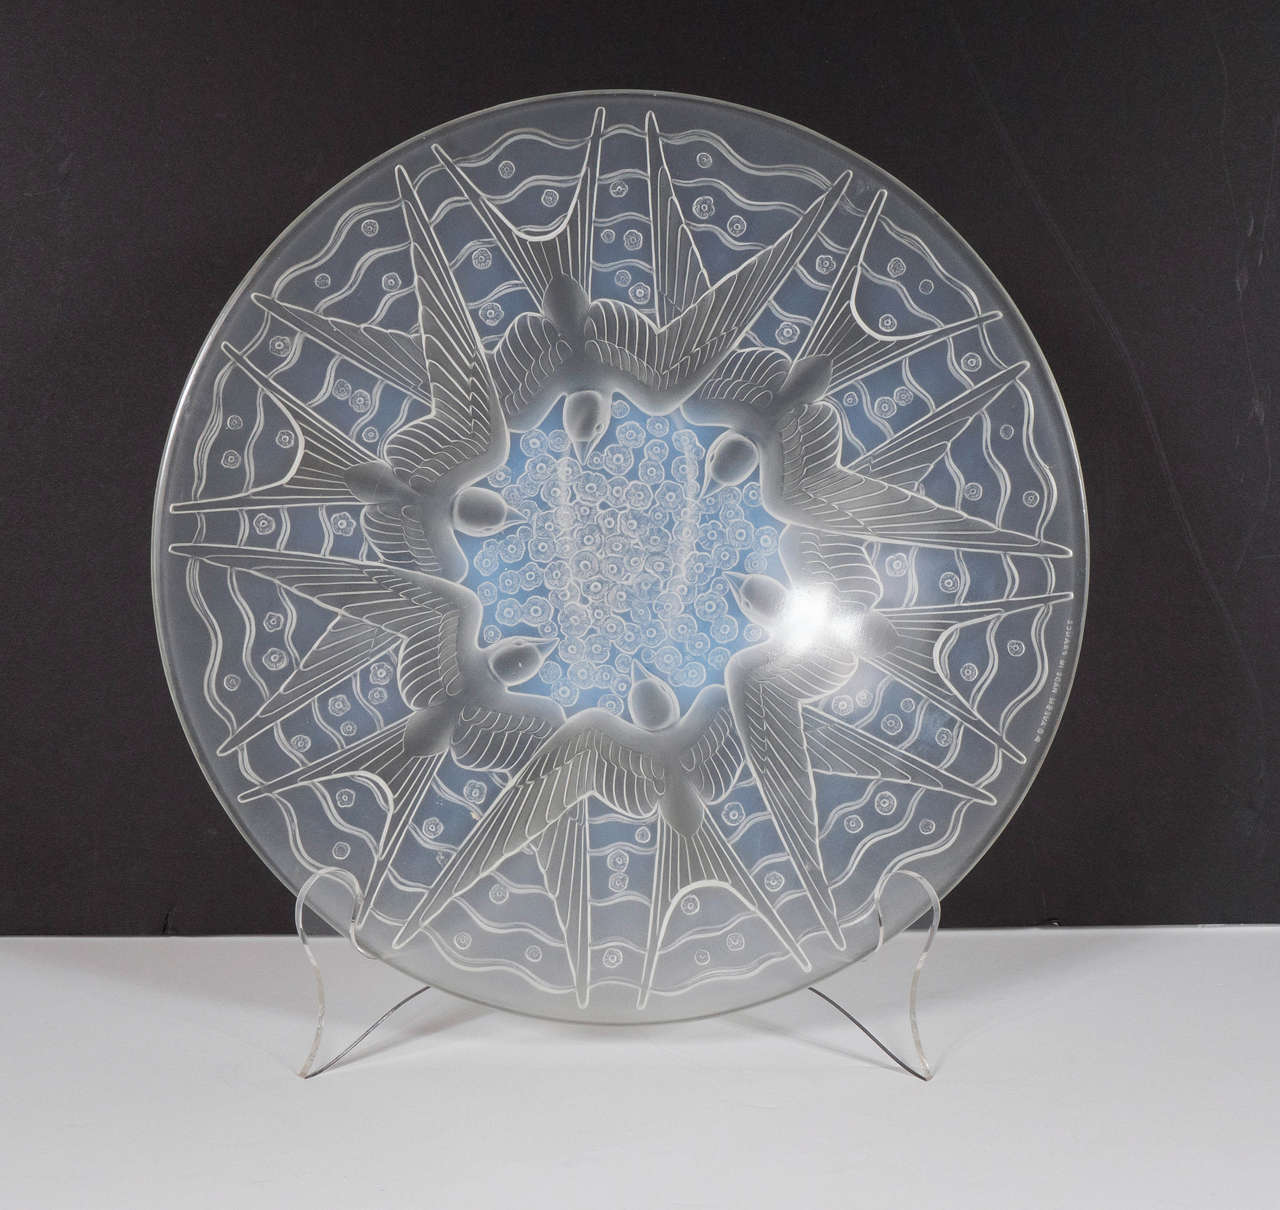 This exquisite Art Deco frosted glass bowl by Pierre D'Avesn depicting six overlapping swallows in flight with stylized Art Deco geometric designs. It has strong symmetry in it's design and is in excellent condition. The bowl carries the D'Avesn